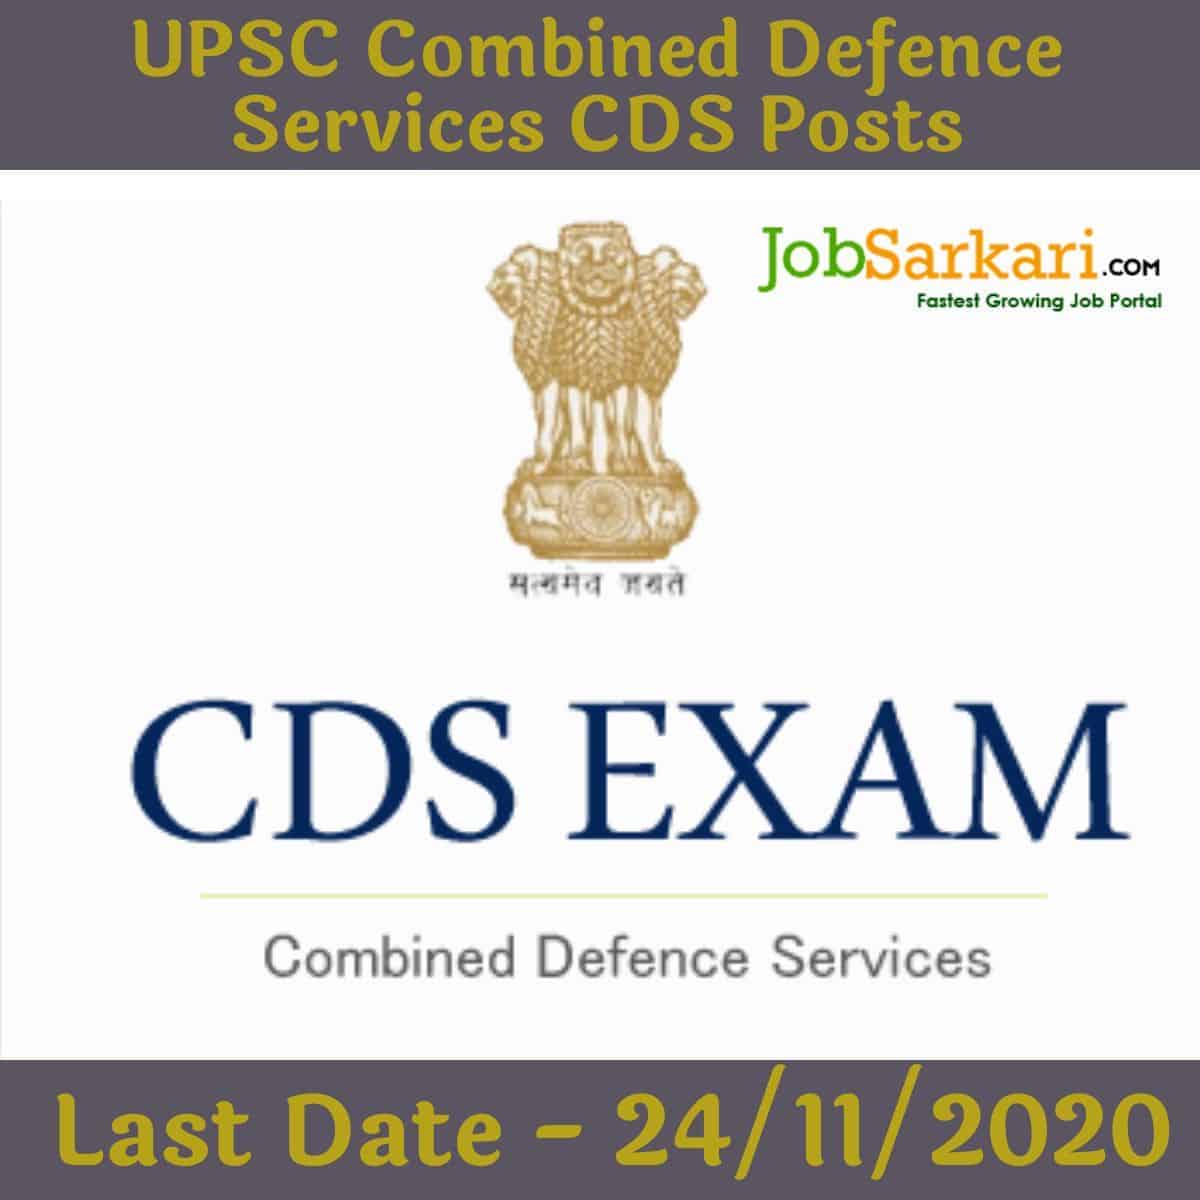 UPSC Combined Defence Services CDS Posts